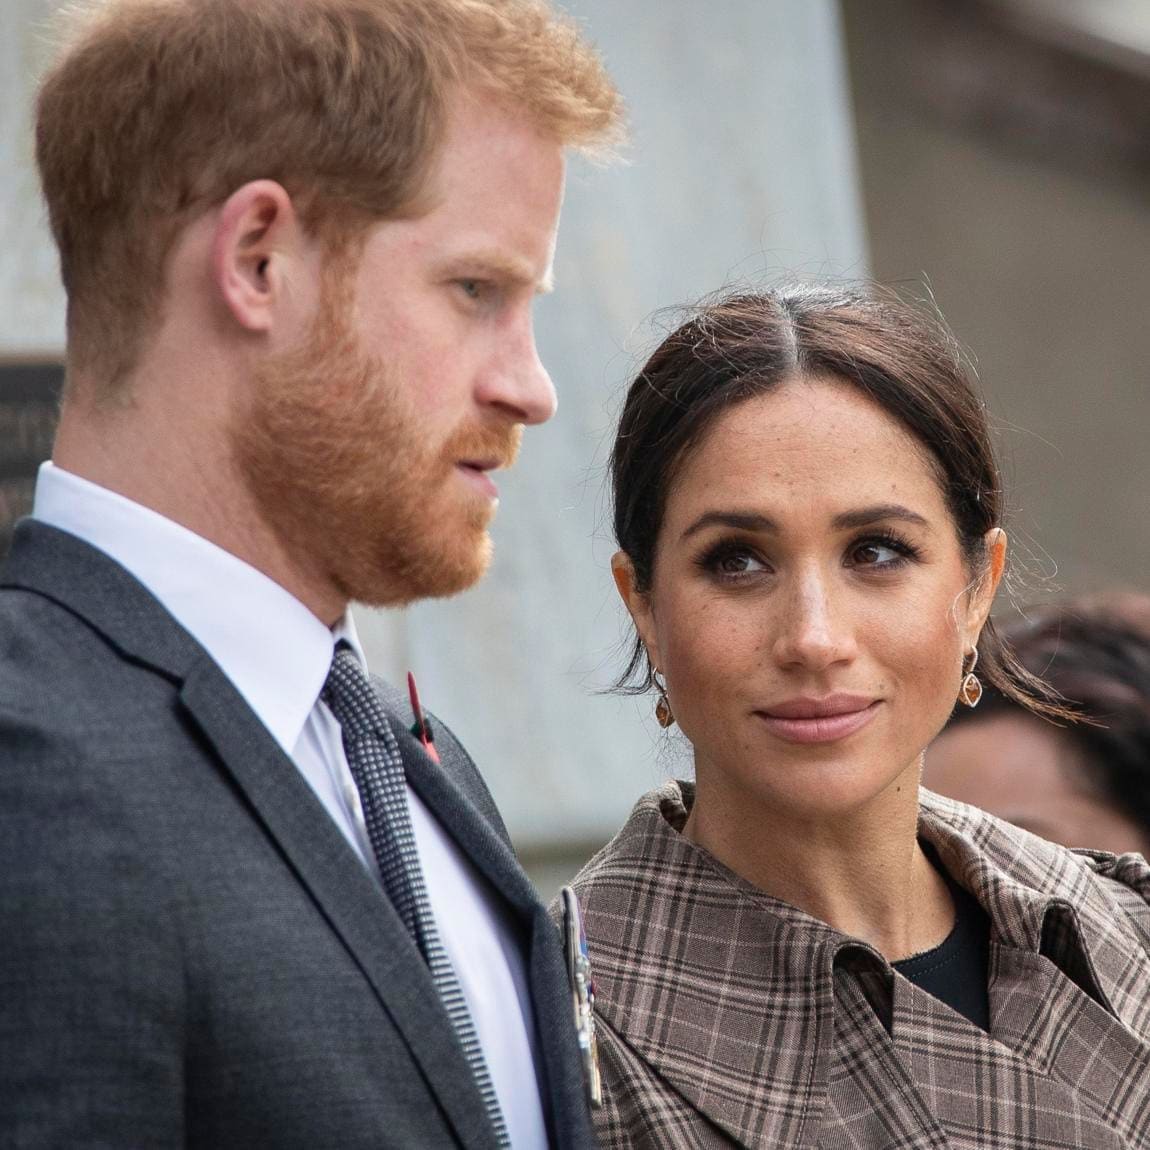 Meghan Markle admitted that she knows what it is like to feel voiceless